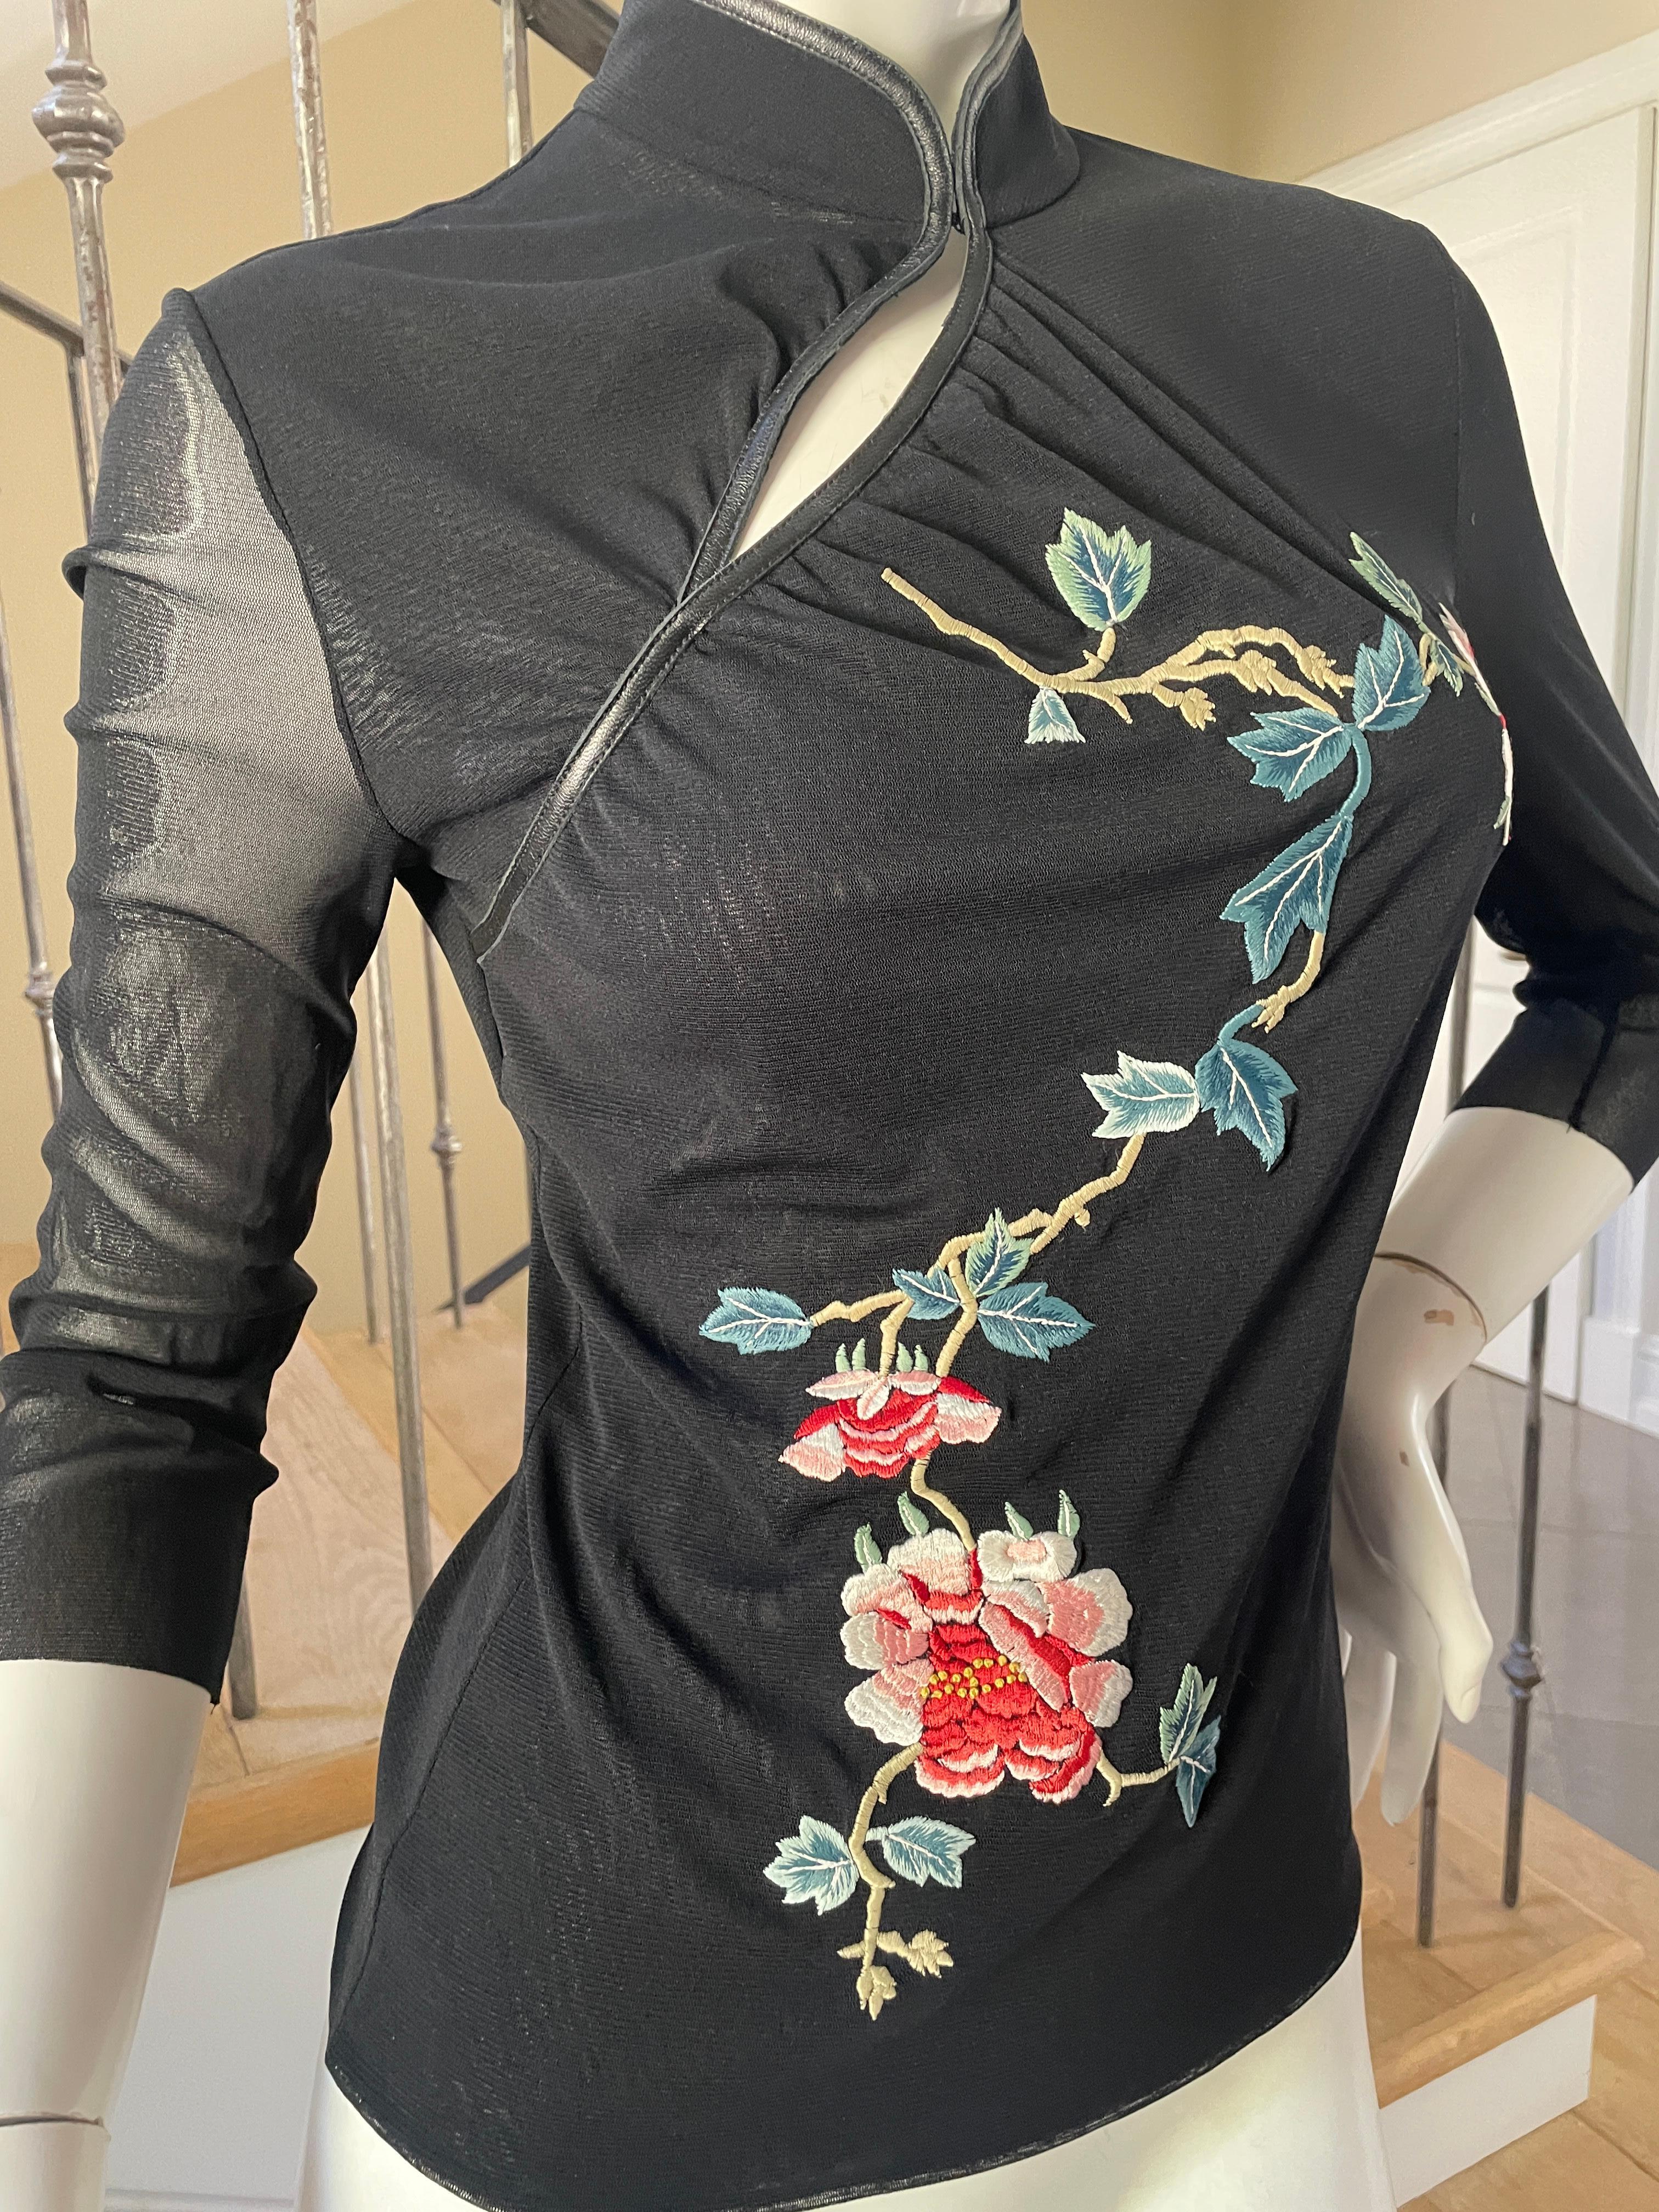 Women's Vivienne Tam Vintage Cheongsam Style Black Top with Embroidered Flowers For Sale